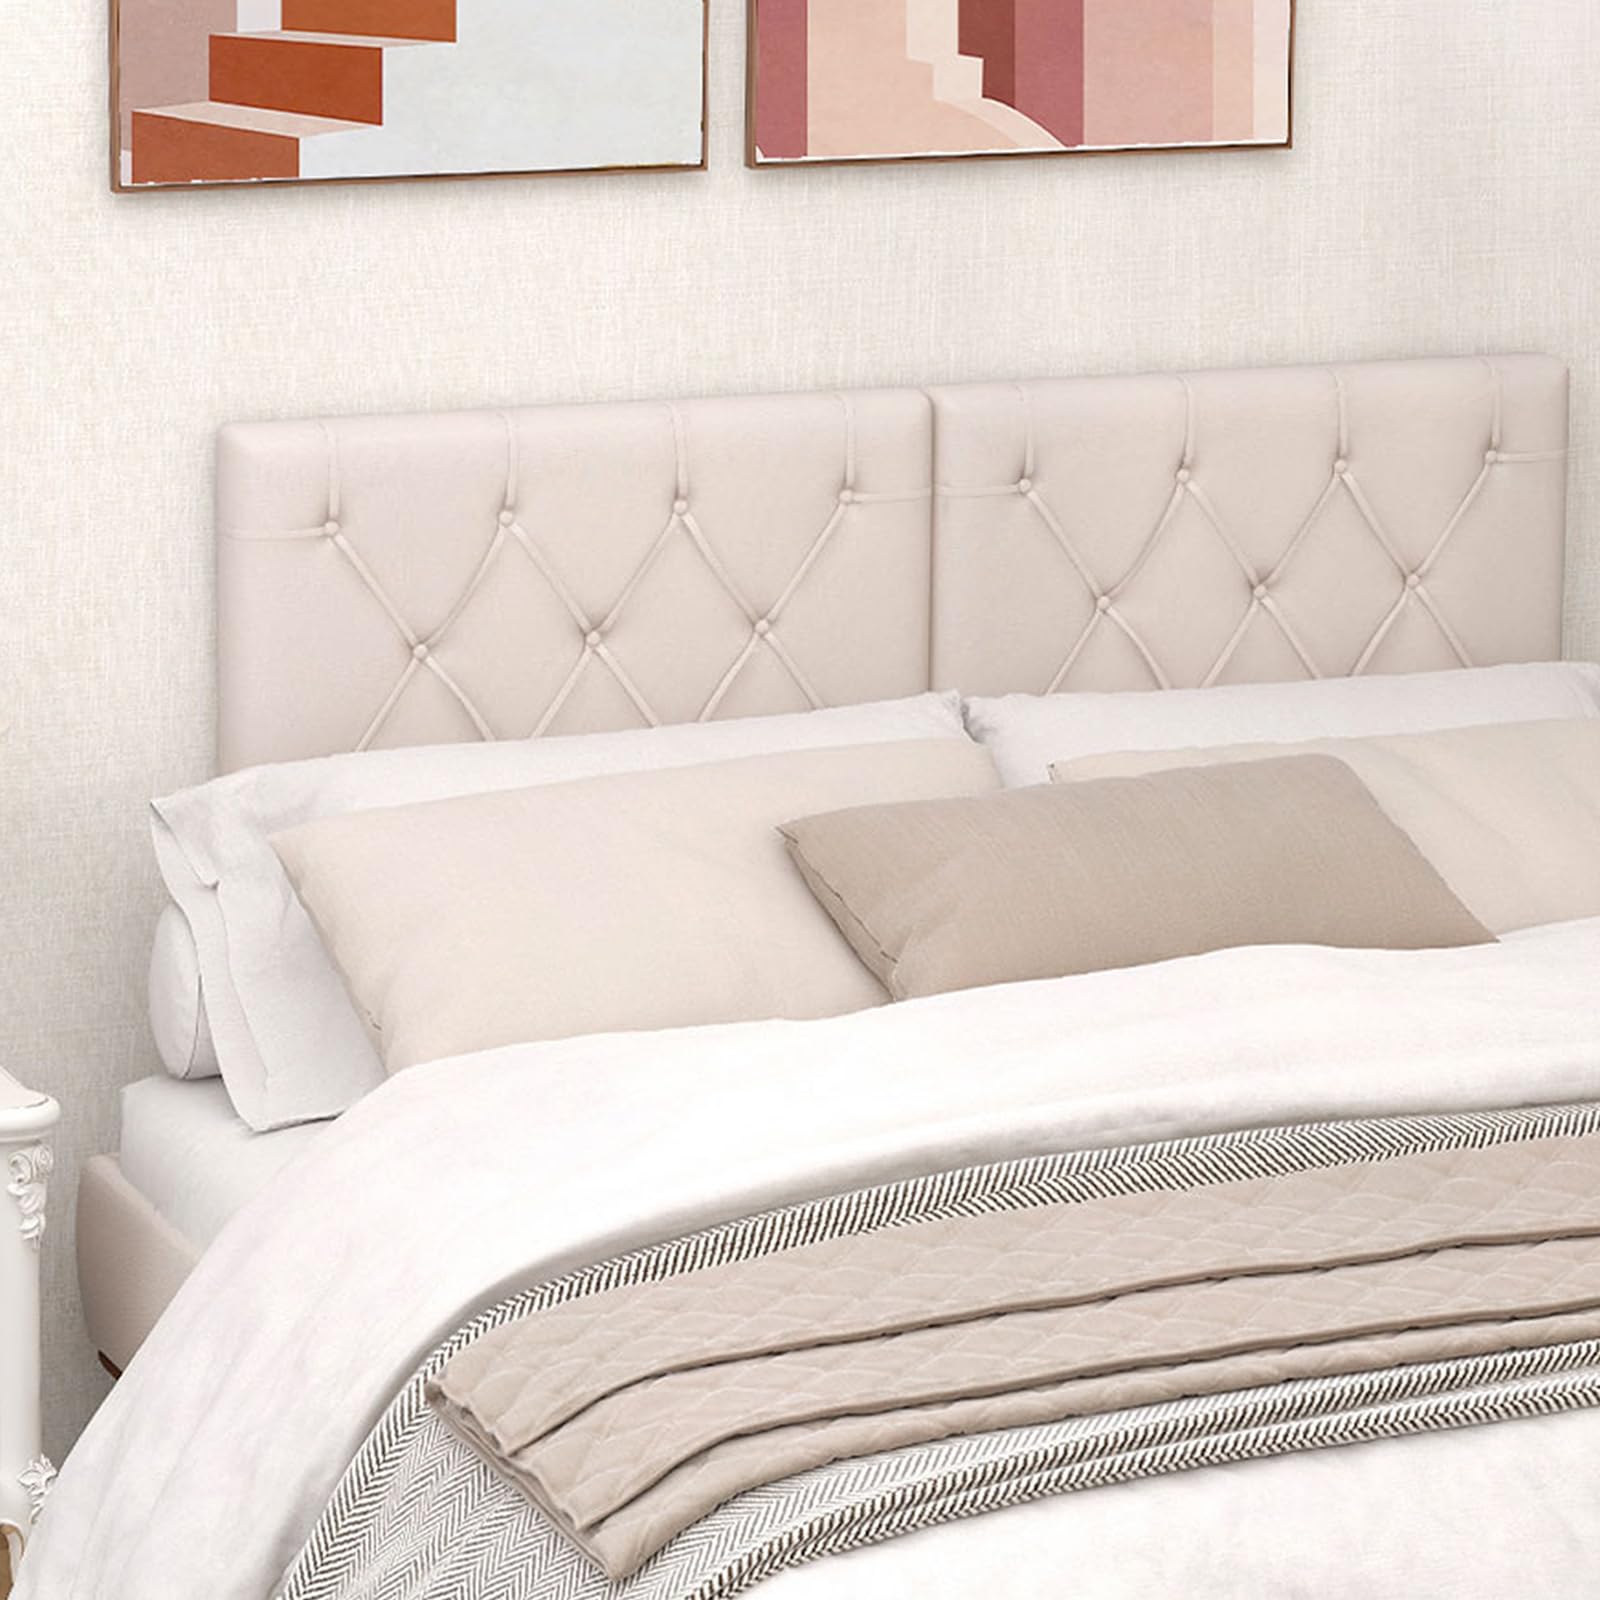 Giantex Upholstered Headboard for Full/Queen/King Size Bed